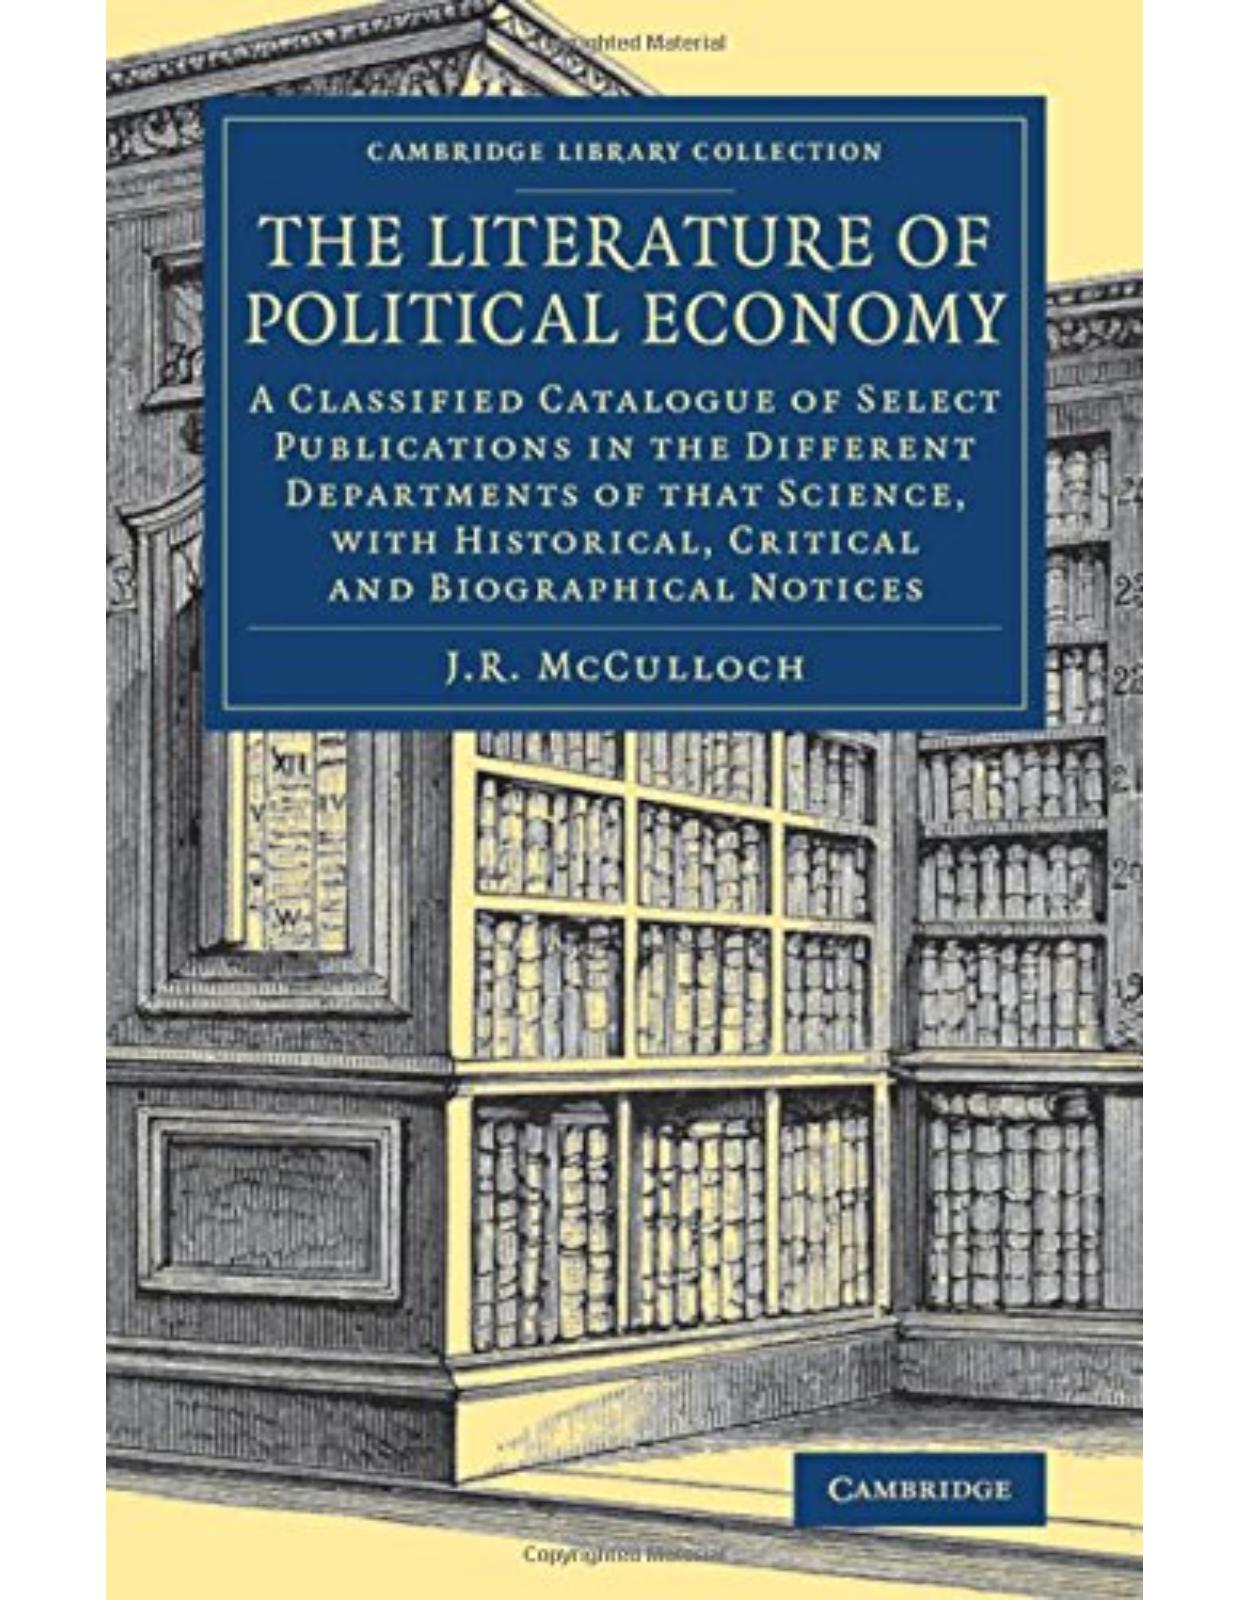 The Literature of Political Economy: A Classified Catalogue of Select Publications in the Different Departments of that Science, with Historical, ... - British and Irish History, 19th Century)